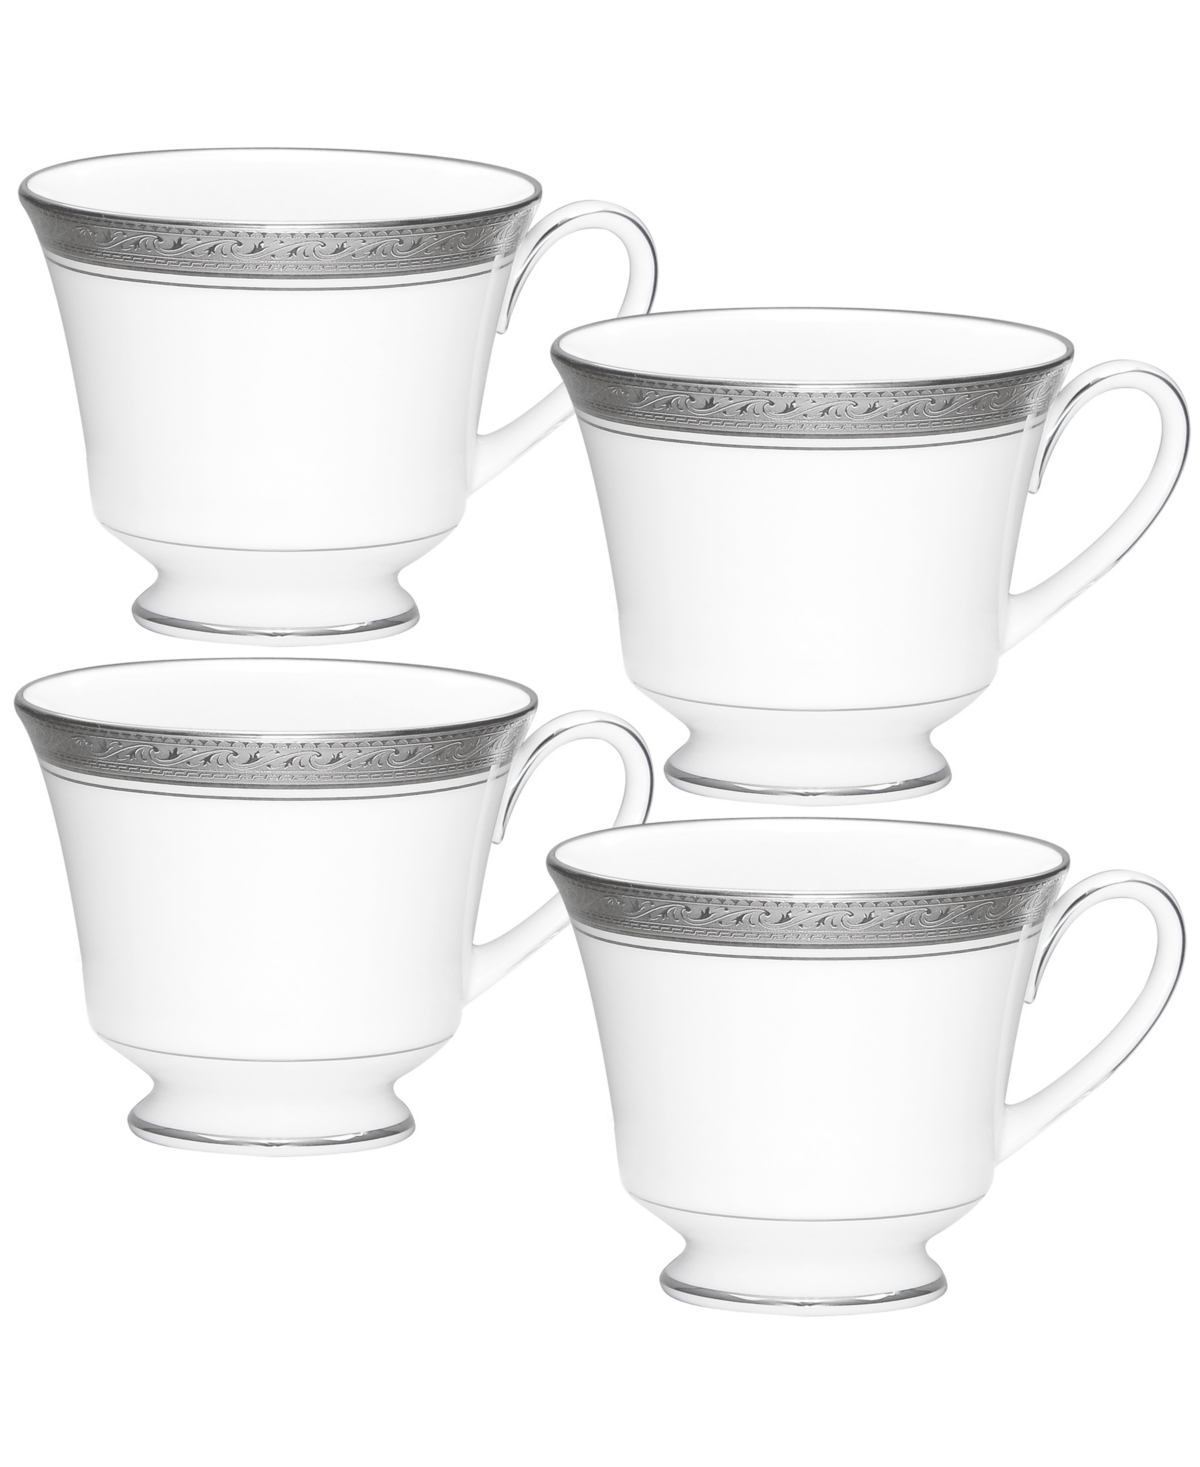 Noritake Crestwood Platinum Set Of 4 Cups, Service For 4 In White